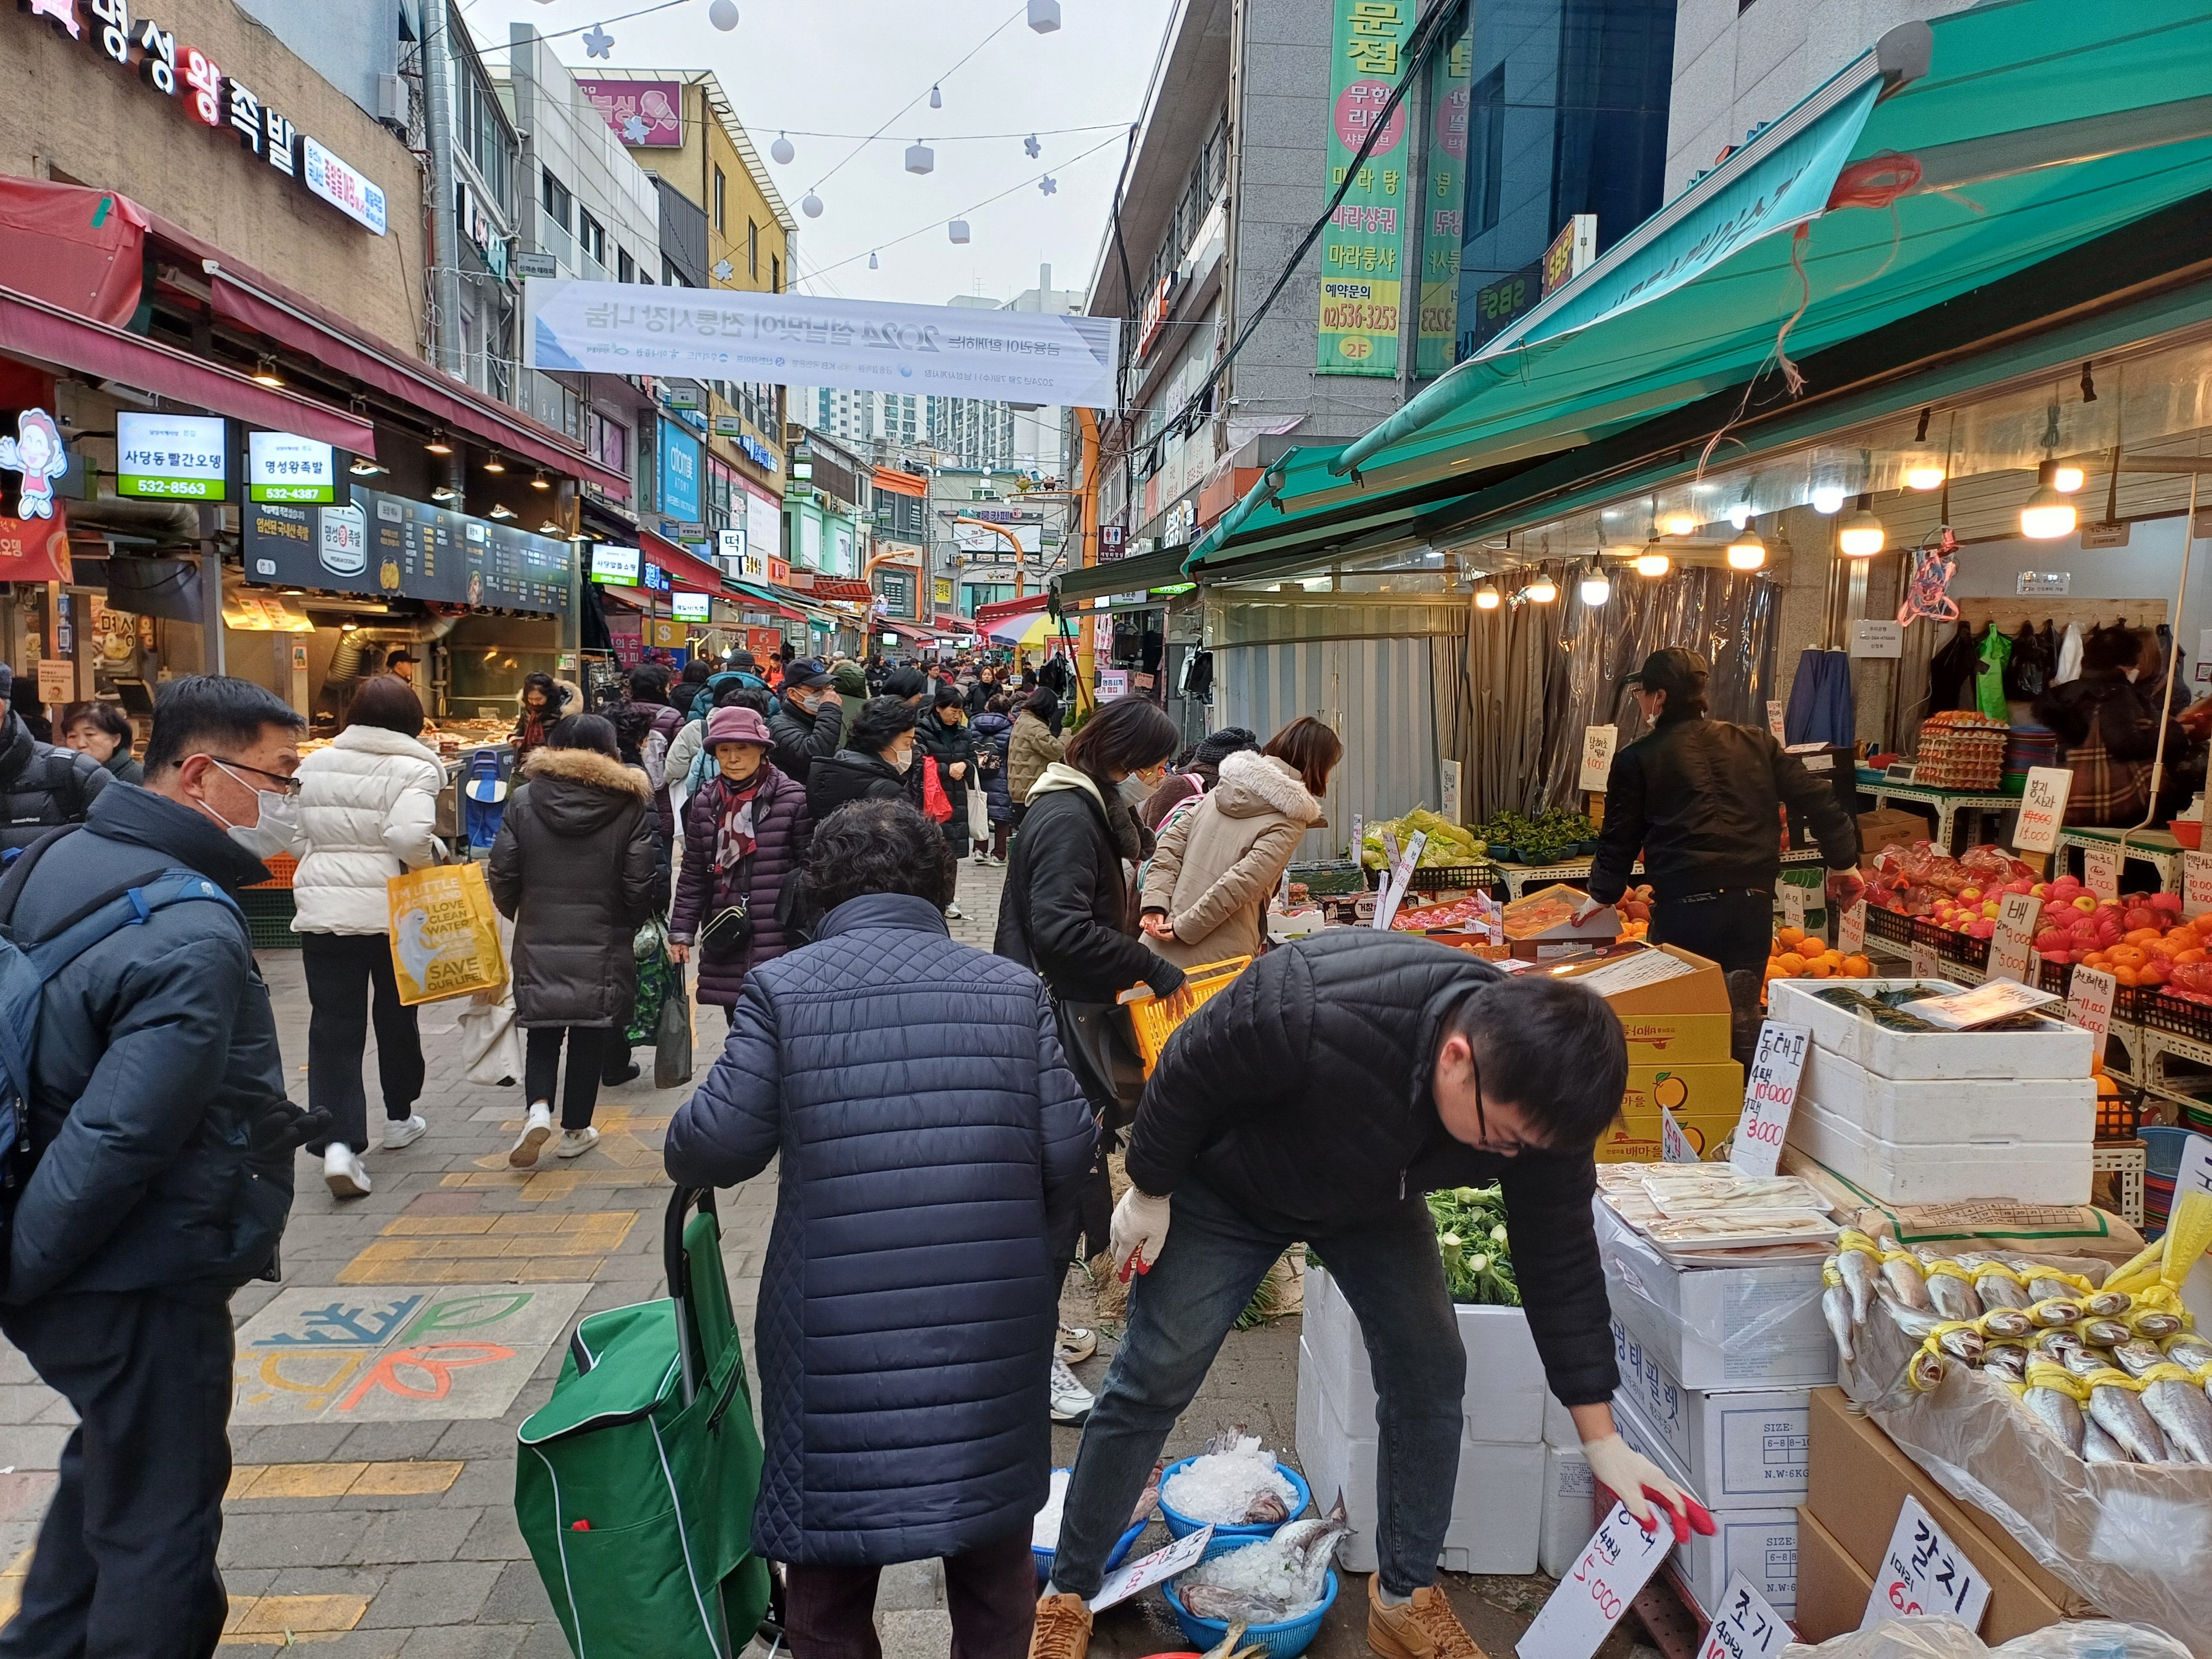 South Koreans buy fruits and vegetables at the Namseong market in the Dongjak district in Seoul on February 7. Photo: Park Chan-kyong